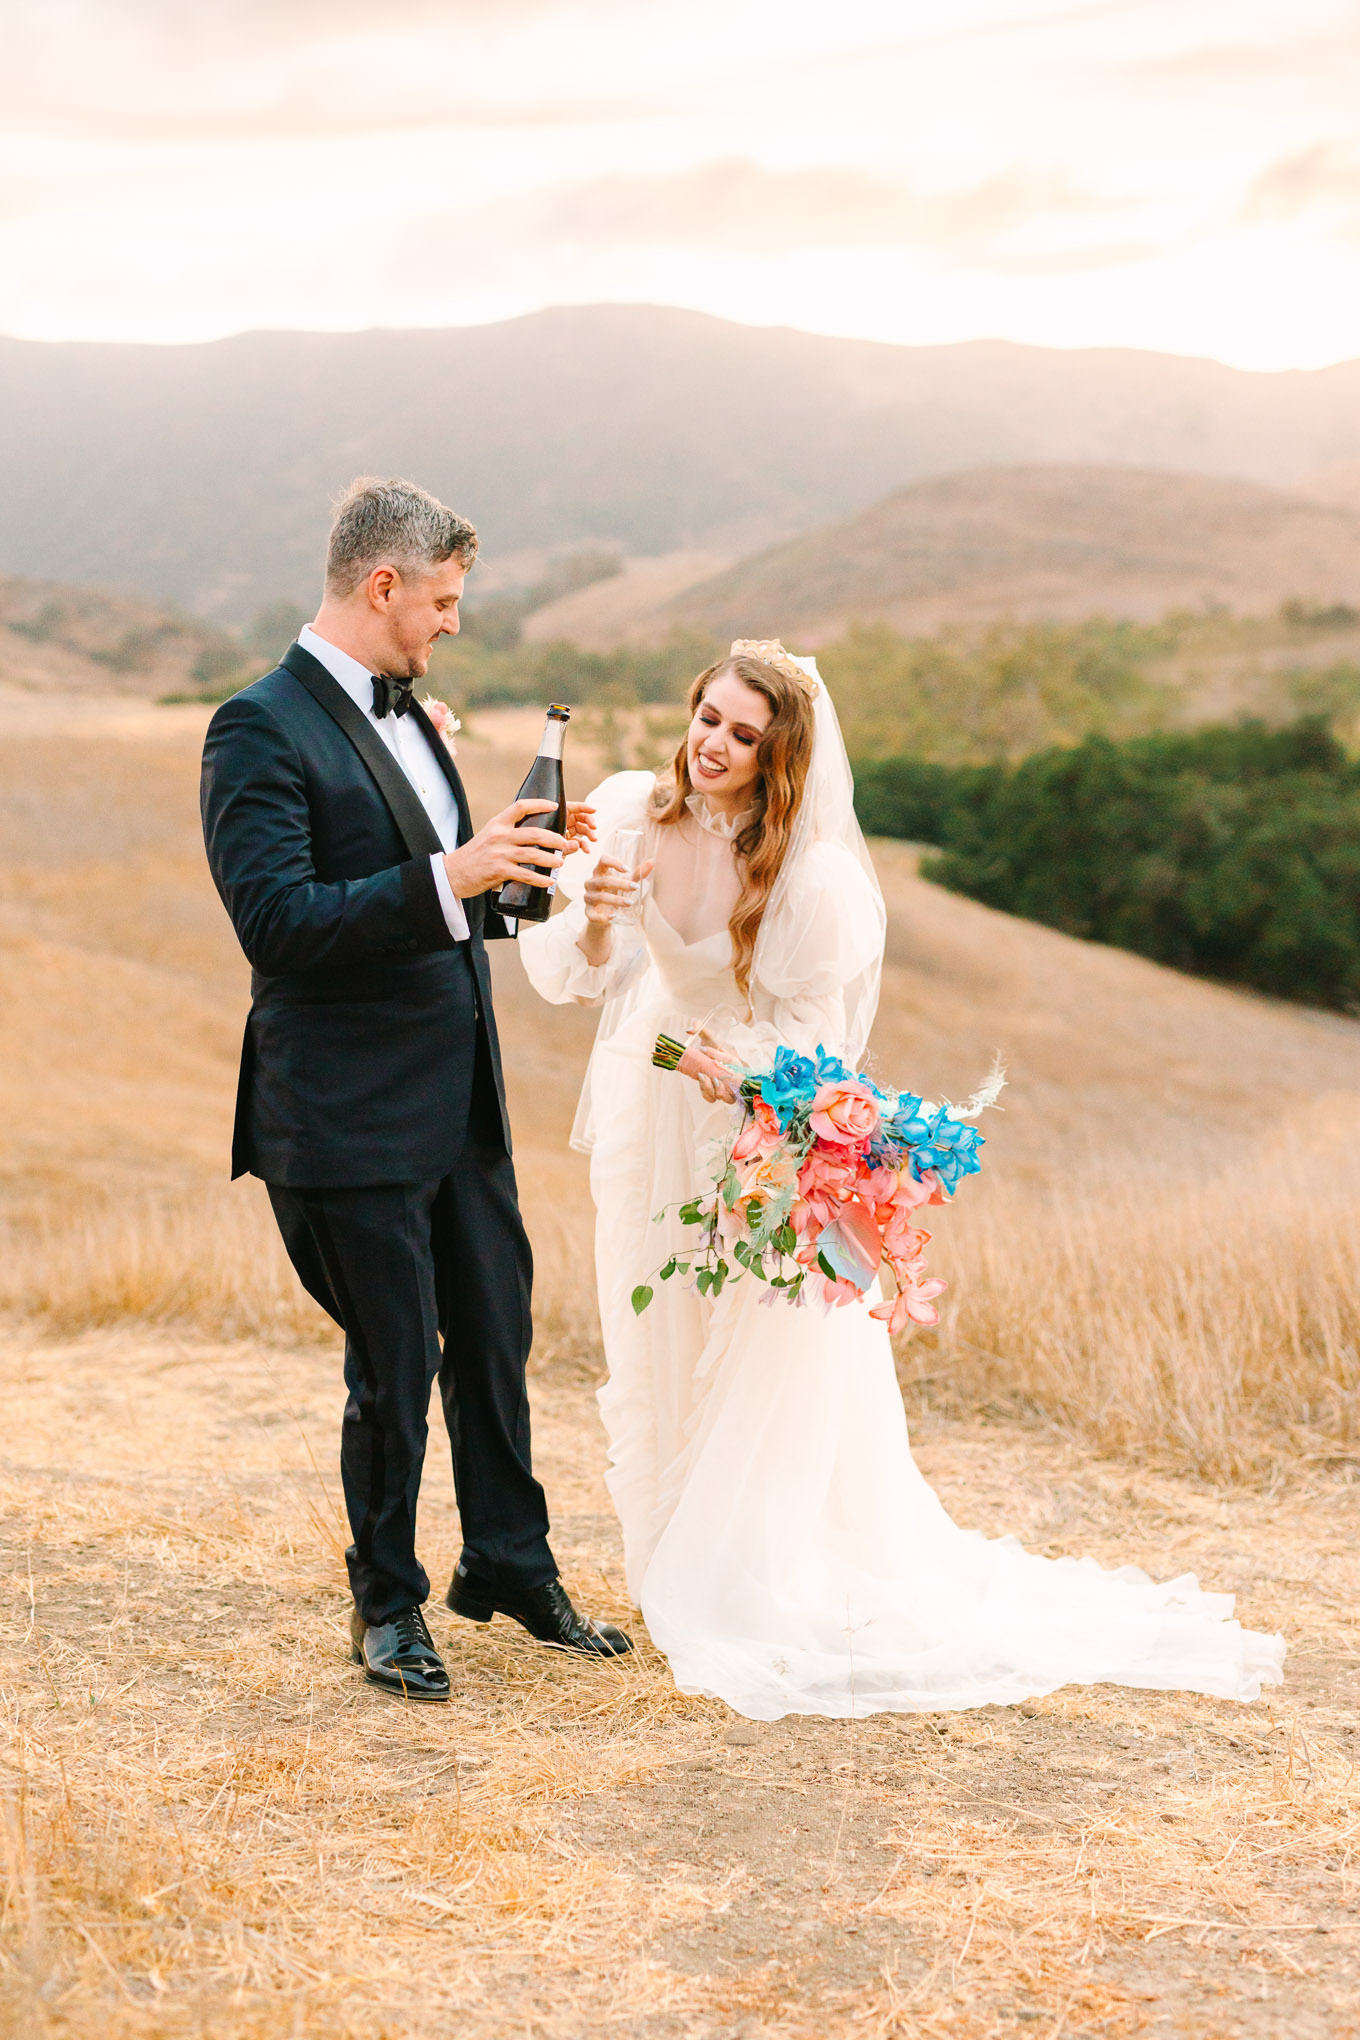 Bride and groom sunset wedding portraits | Allison Harvard’s colorful and quirky wedding at Higuera Ranch in San Luis Obispo | #sanluisobispowedding #californiawedding #higueraranch #madonnainn   
Source: Mary Costa Photography | Los Angeles